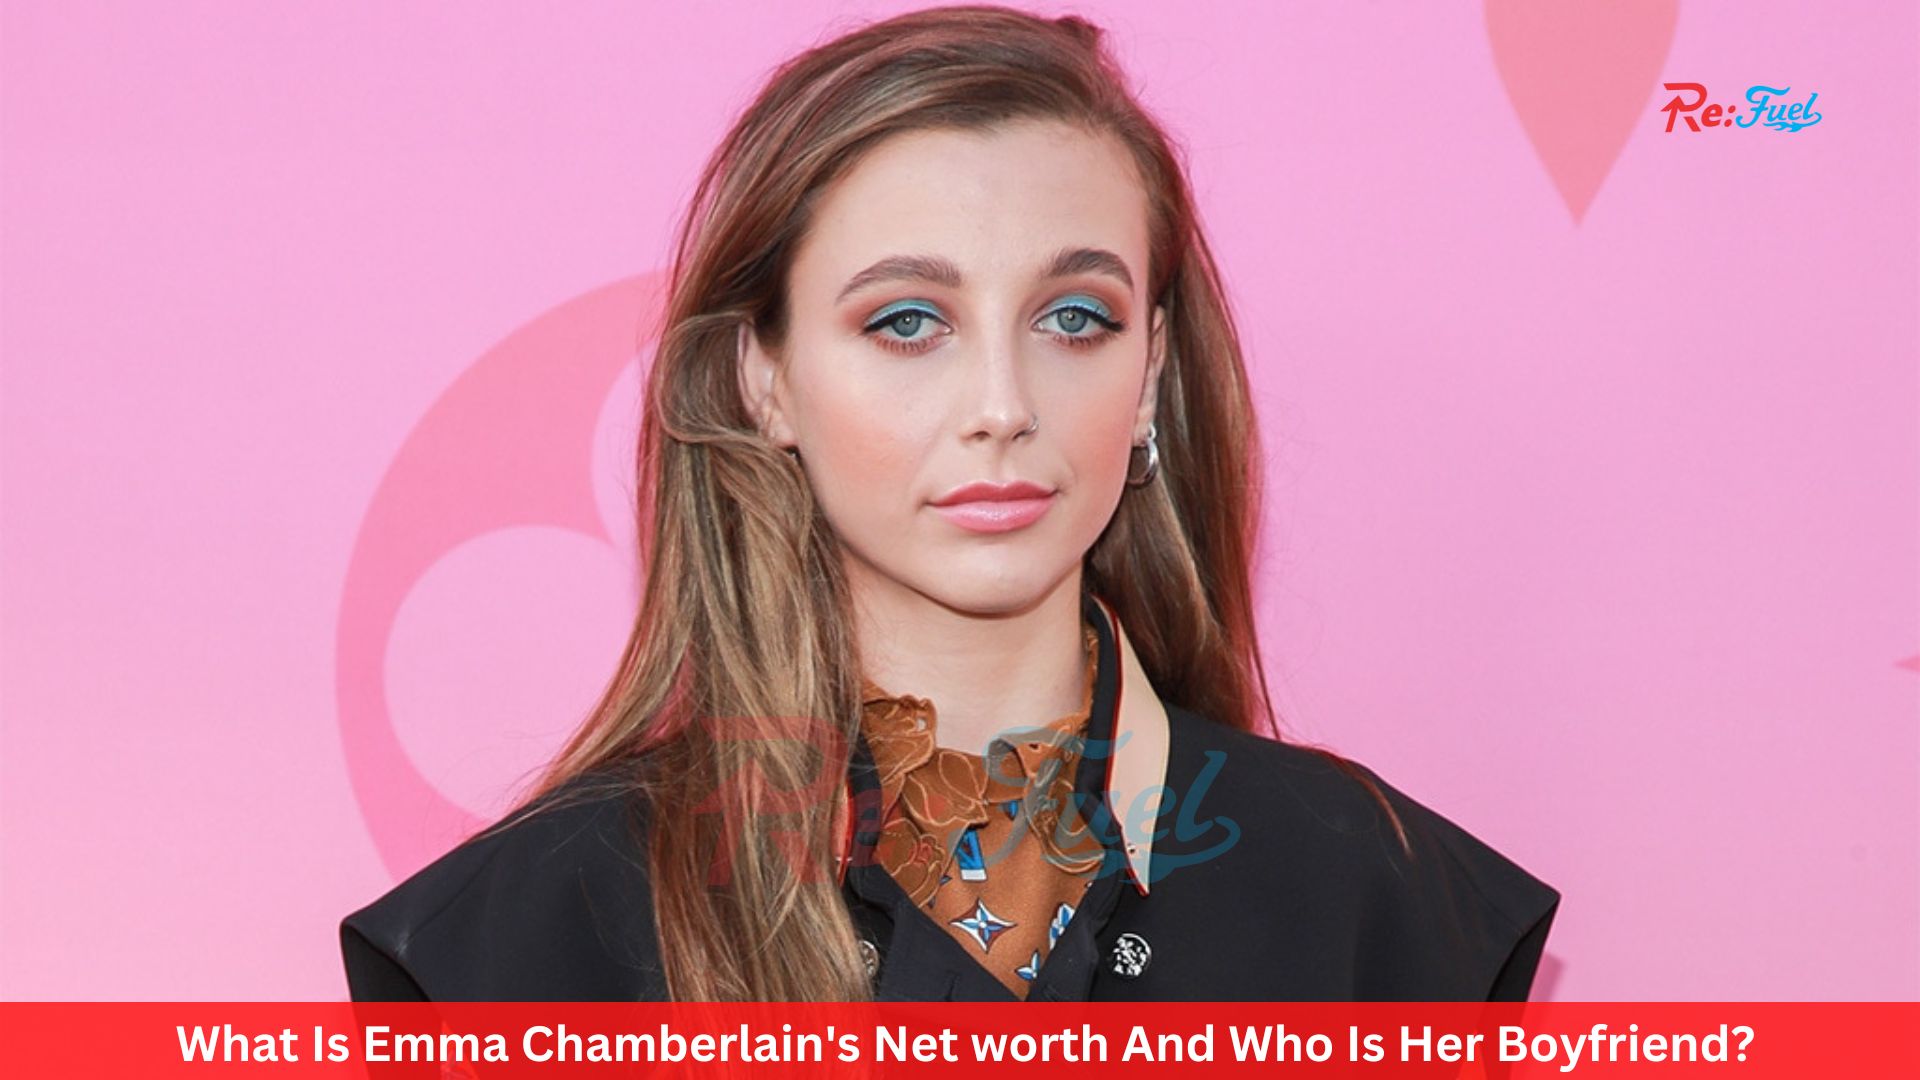 What Is Emma Chamberlain's Net worth And Who Is Her Boyfriend?